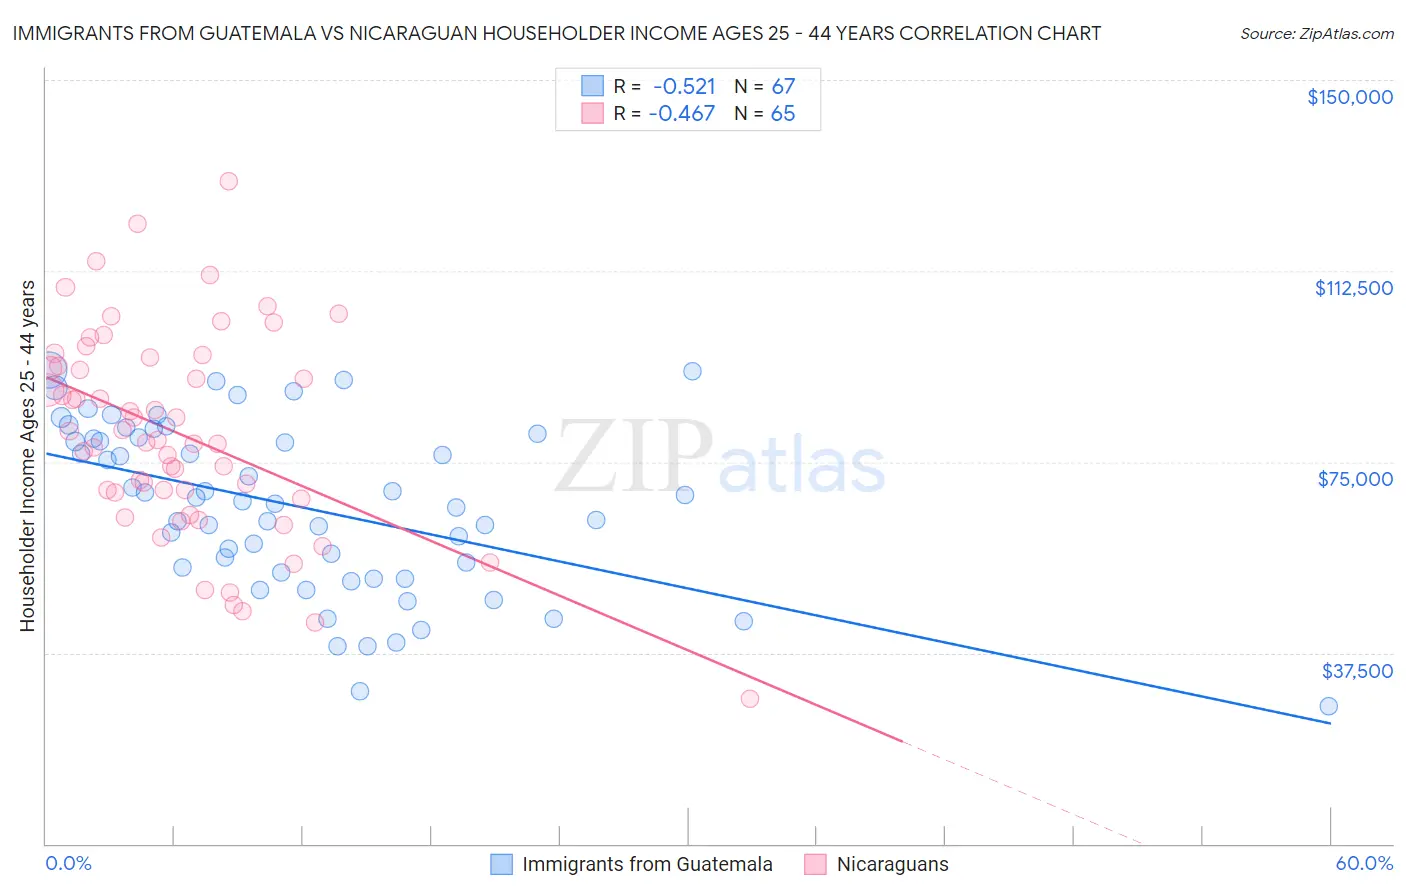 Immigrants from Guatemala vs Nicaraguan Householder Income Ages 25 - 44 years